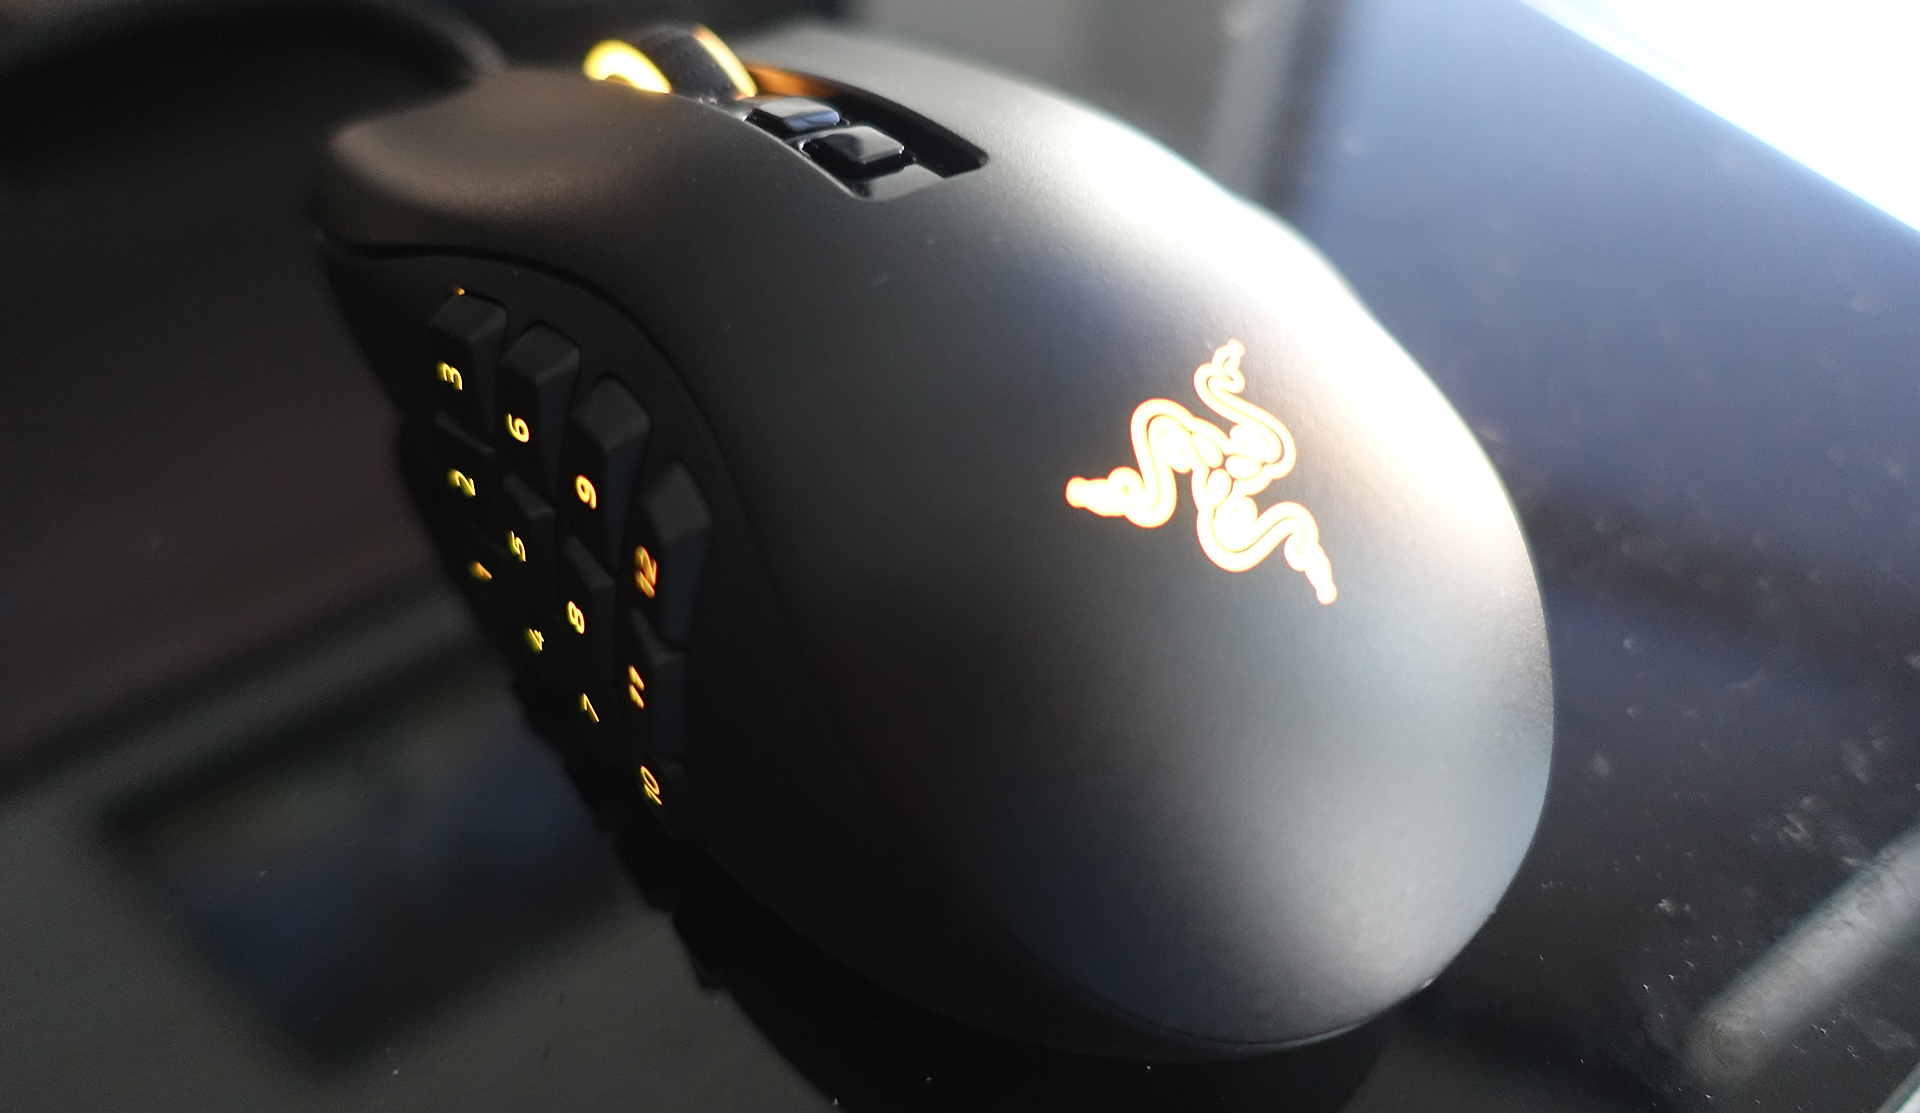 Razer Naga Pro Review: Three Designs, One Excellent Wireless MMO Mouse